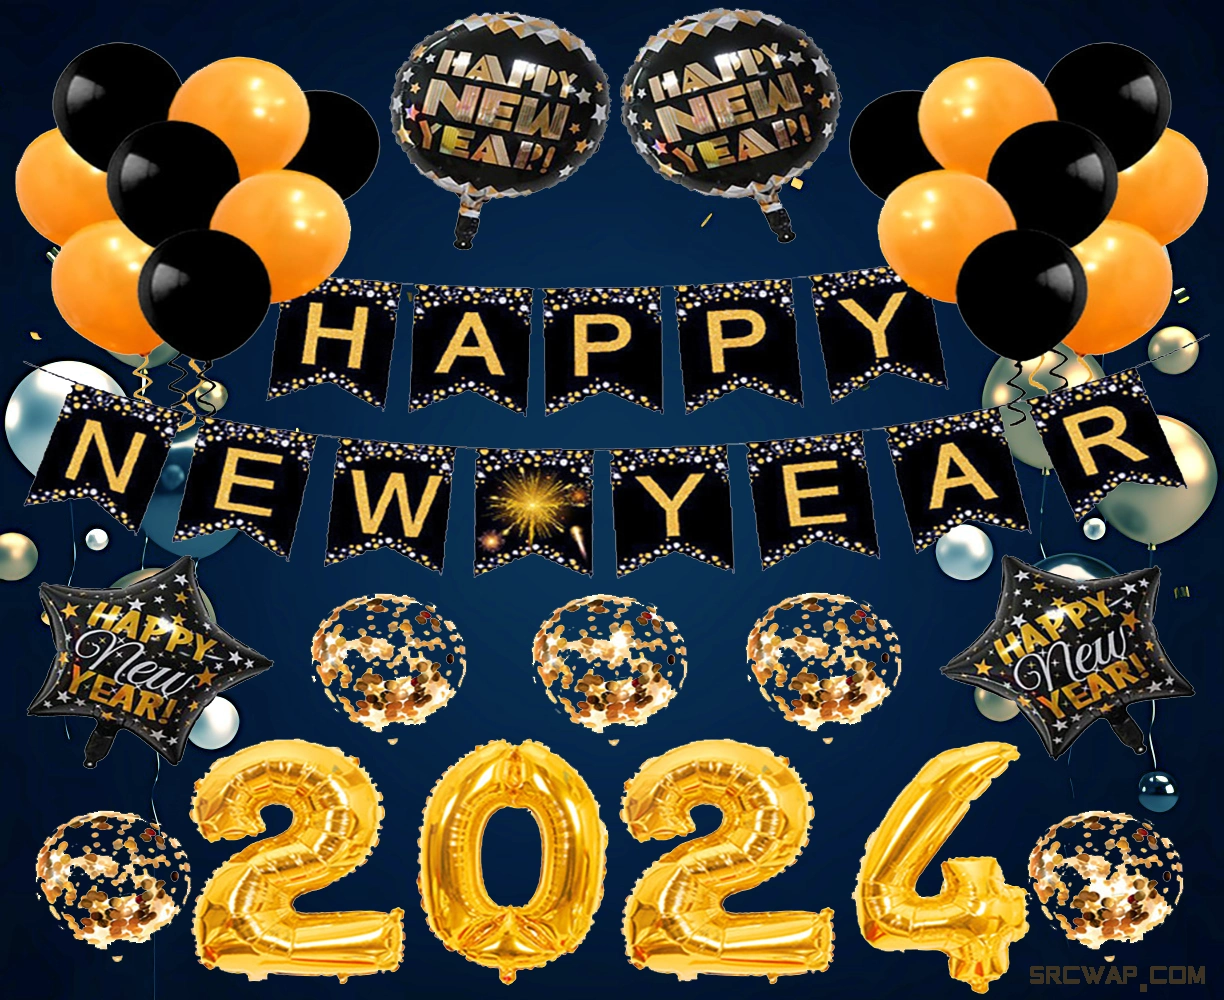 Happy new year 2023 background with realistic golden balloons